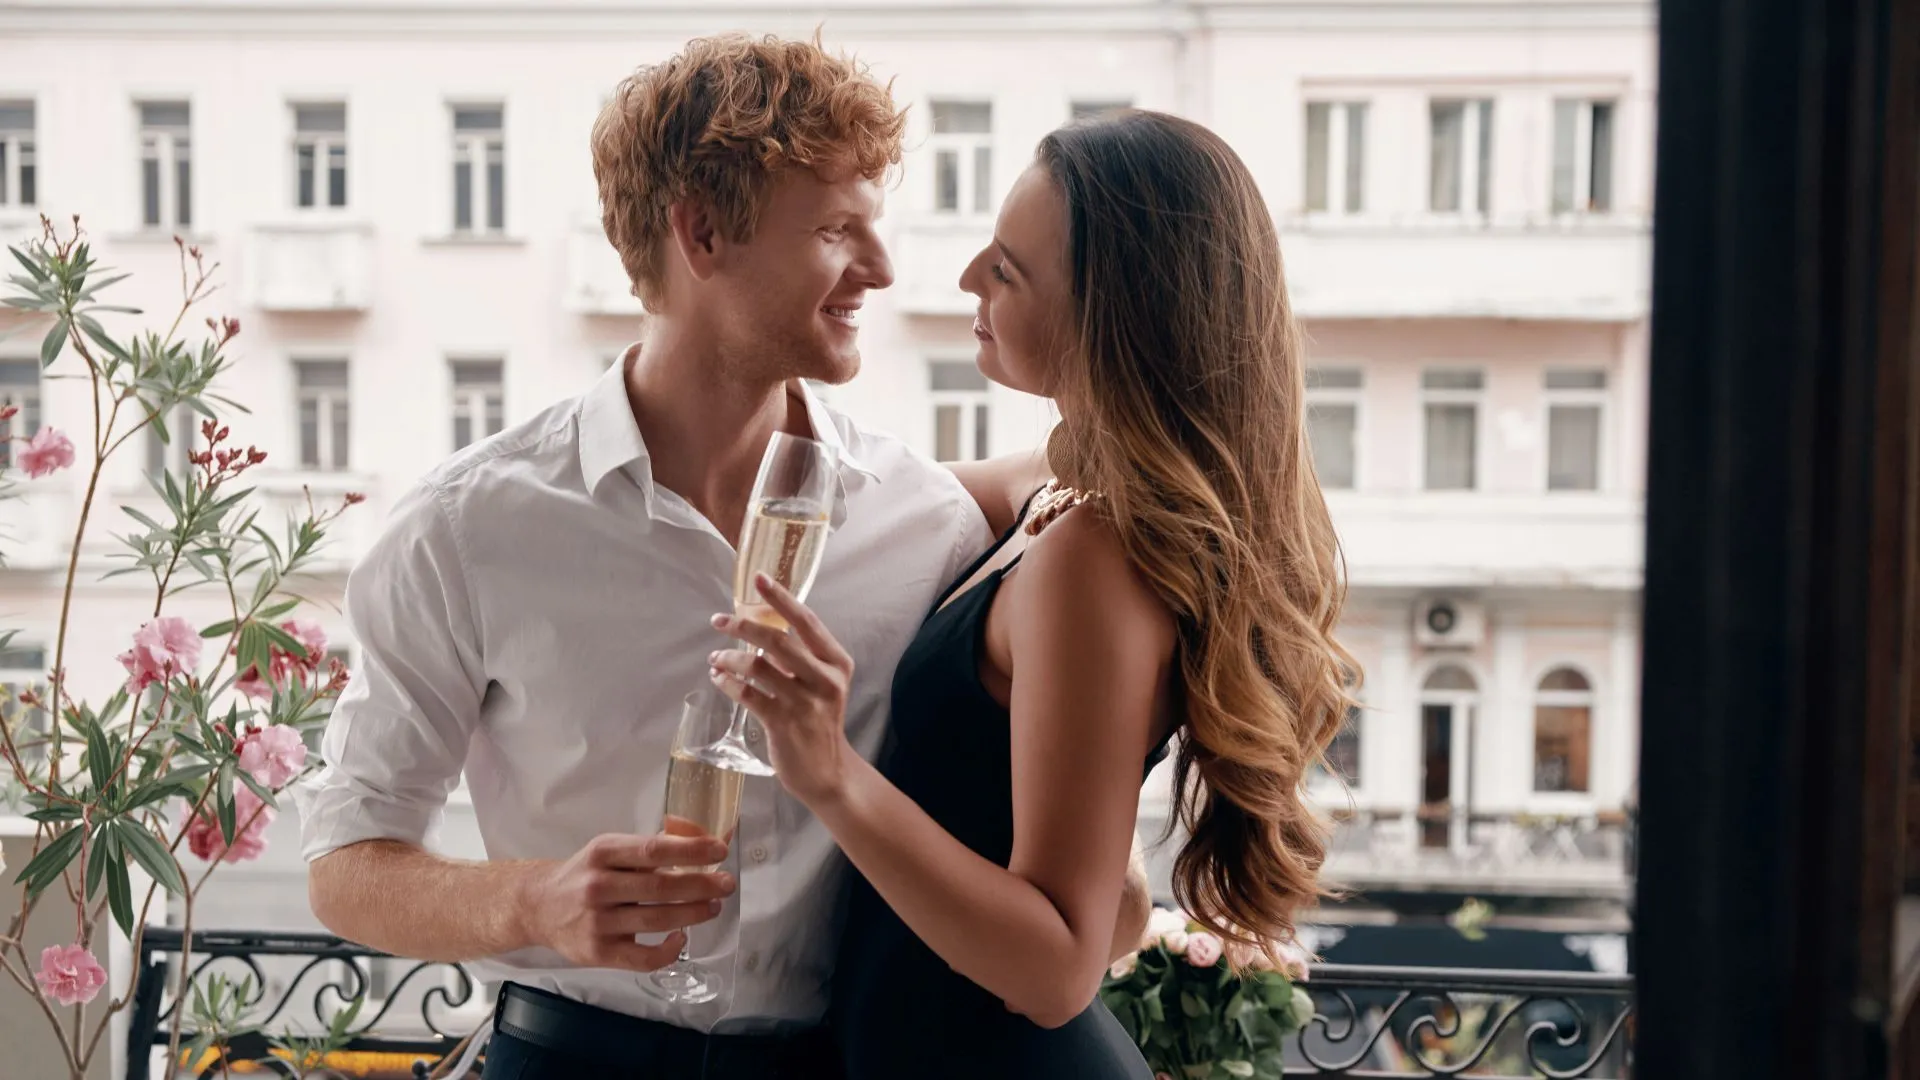 Happy young couple in formalwear embracing while enjoying champagne on the balcony together.